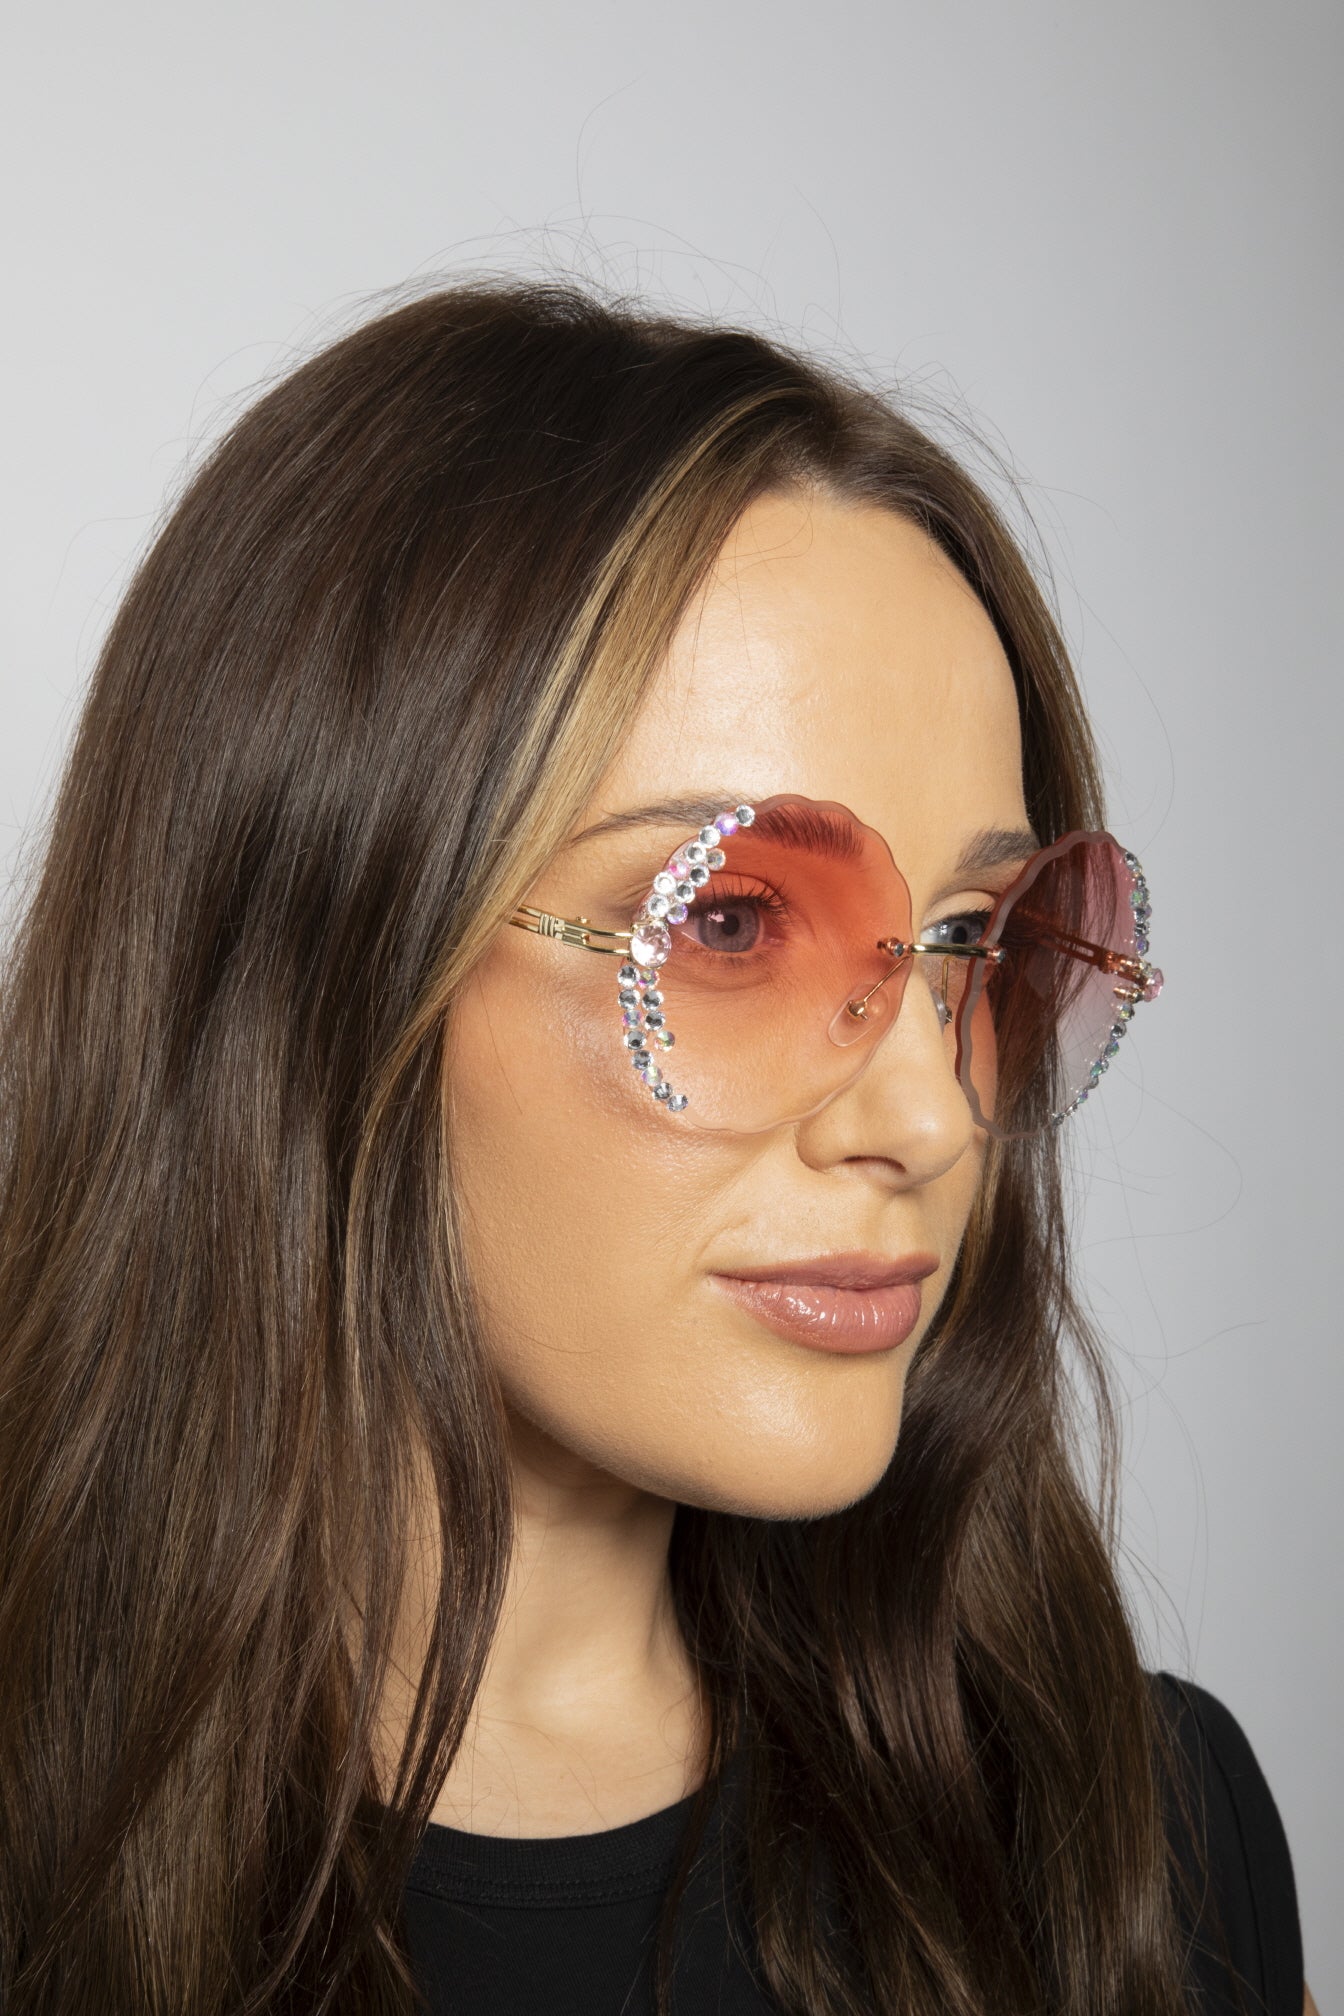 Oversized Round Frameless Sunglasses with Crystal Detail in Pink